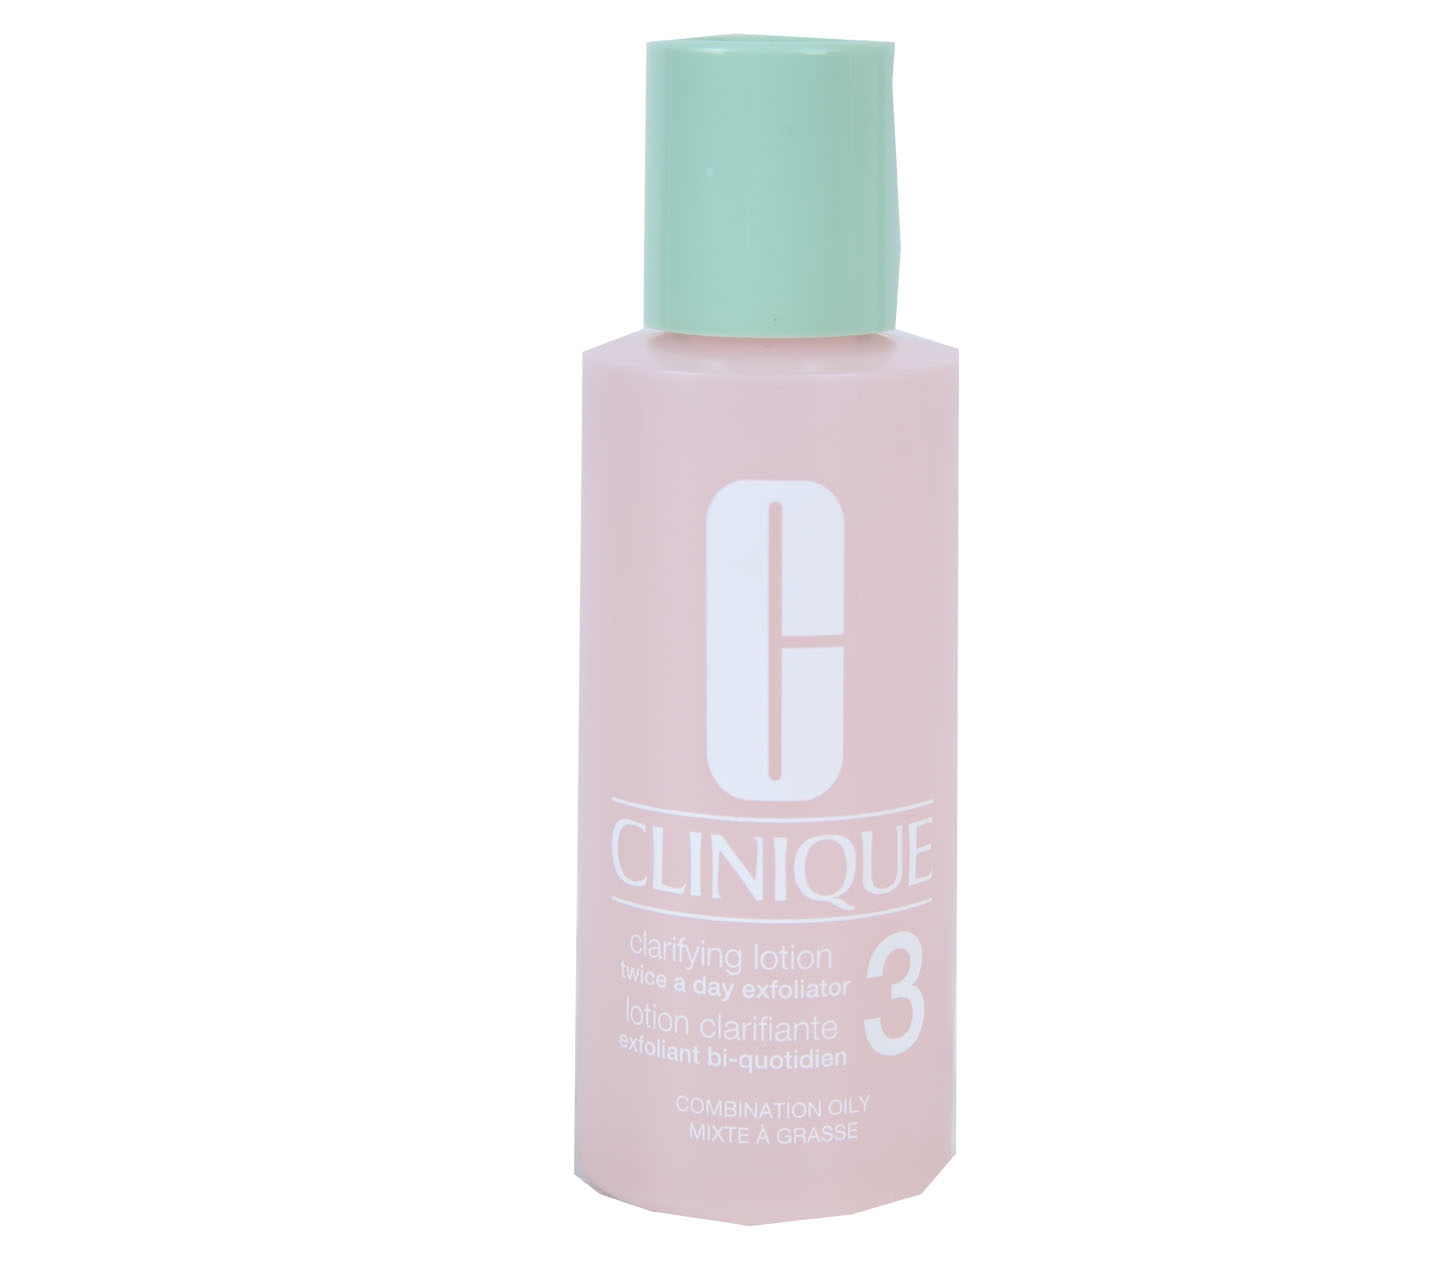 Clinique Clarifying Lotion Twice A Day Exfoliator Faces